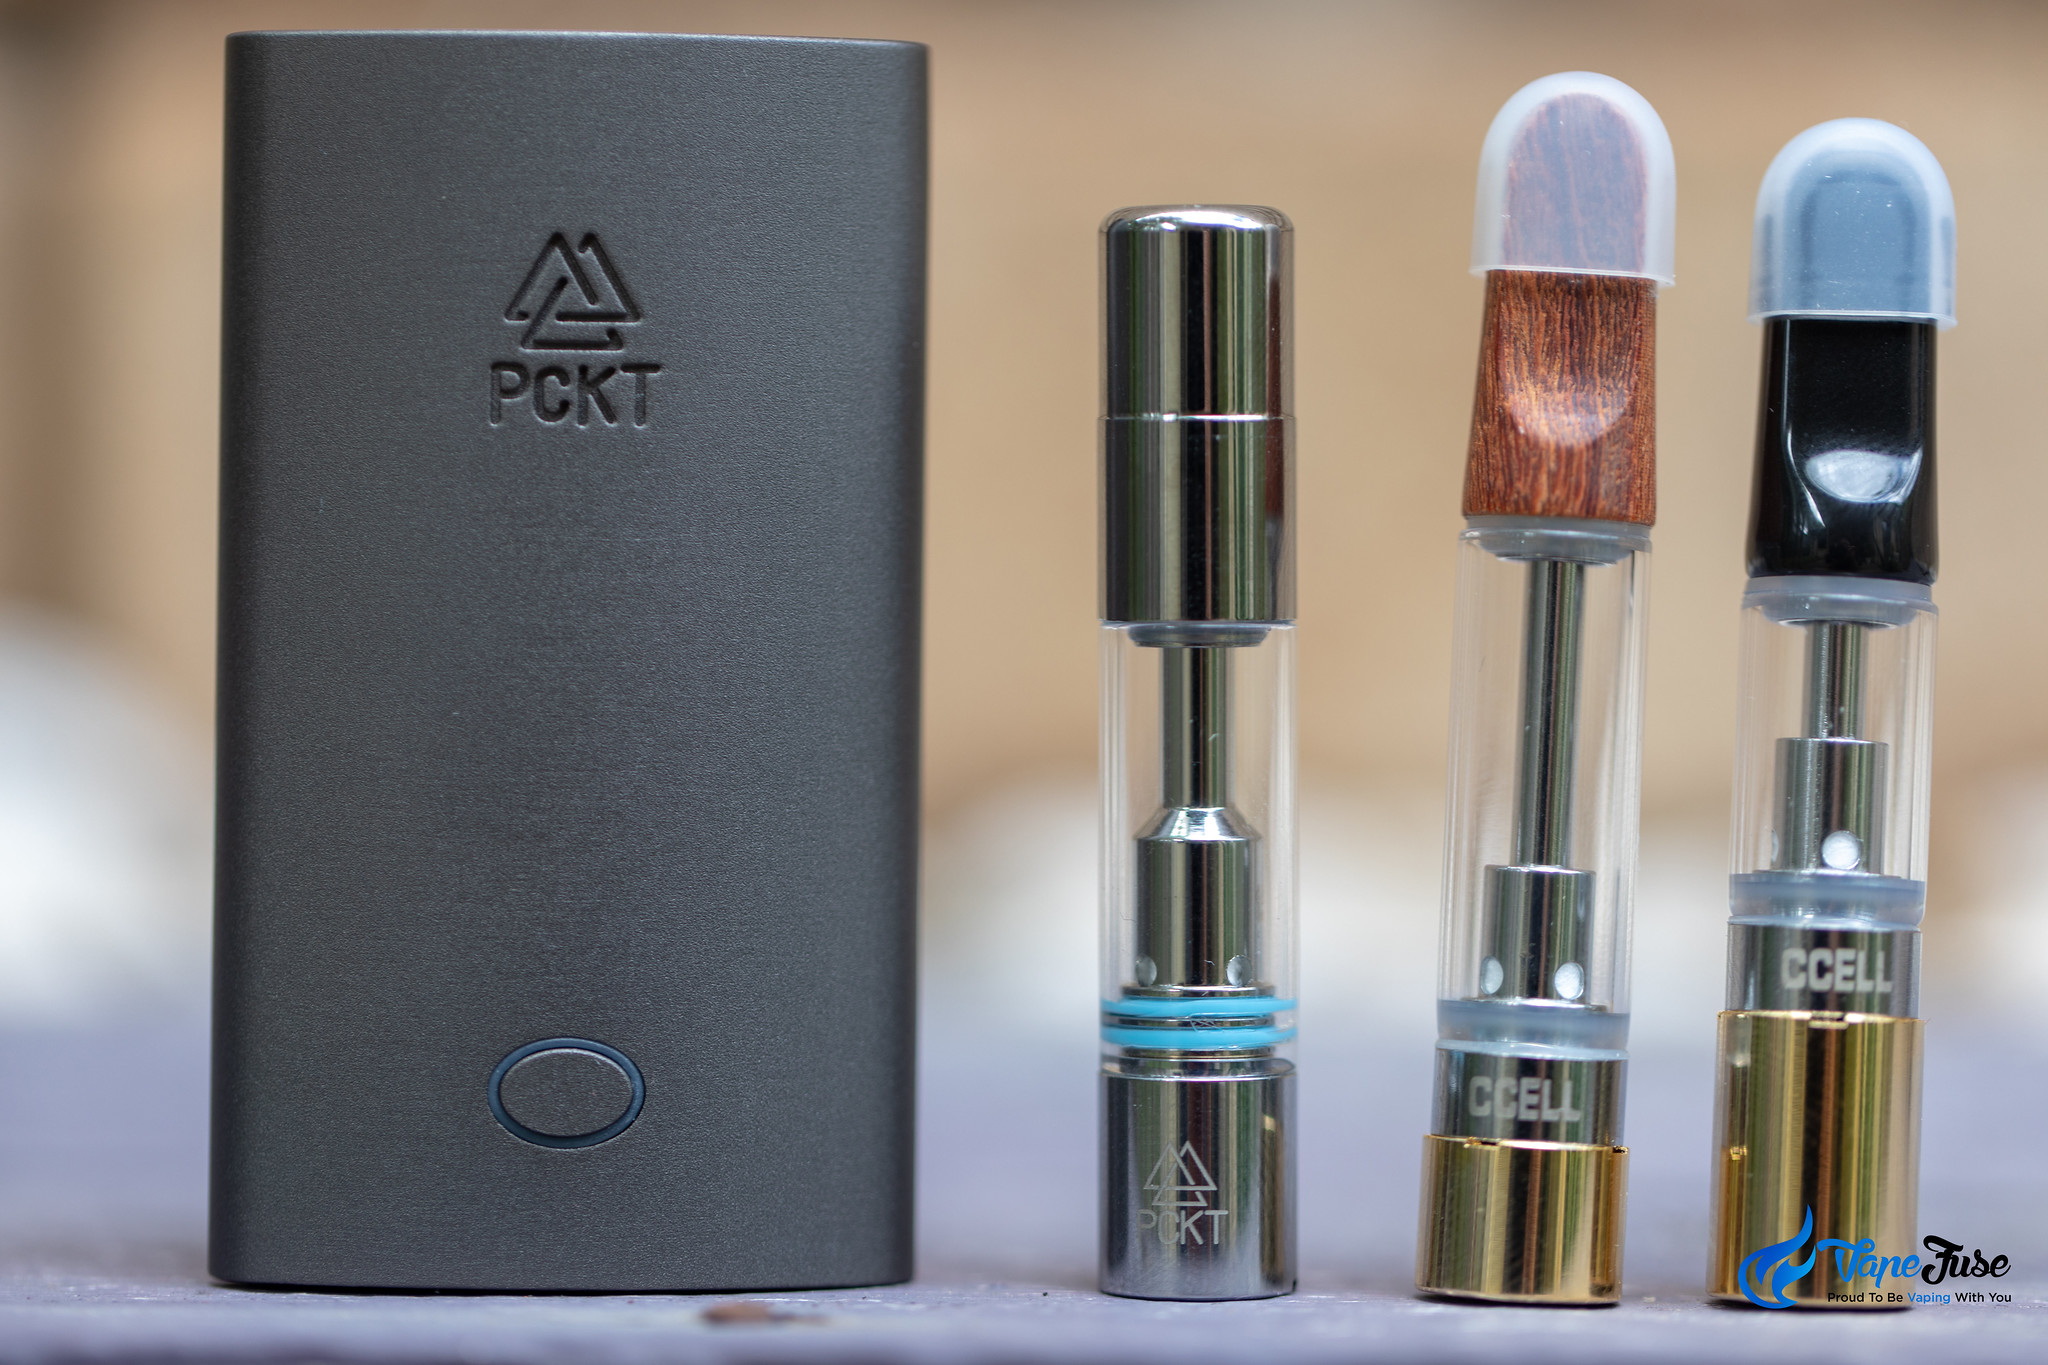 PCKT One Plus with SPRK and CCell TH2 Cartridges